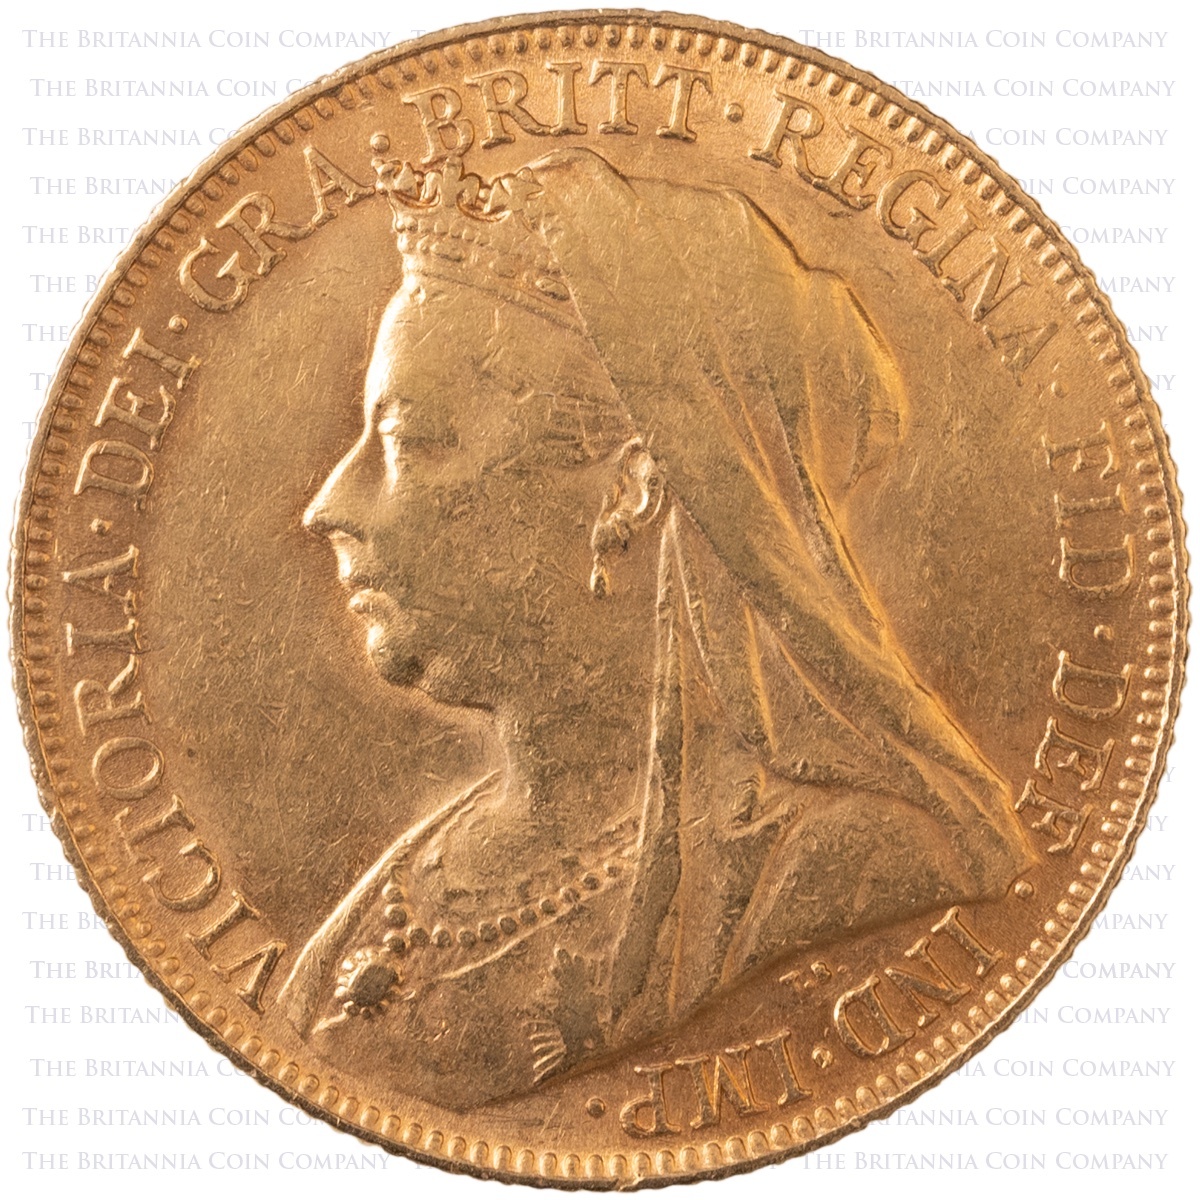 1900 Queen Victoria Gold Full Sovereign Perth Mint Widowed Veiled Old Head Coin Obverse